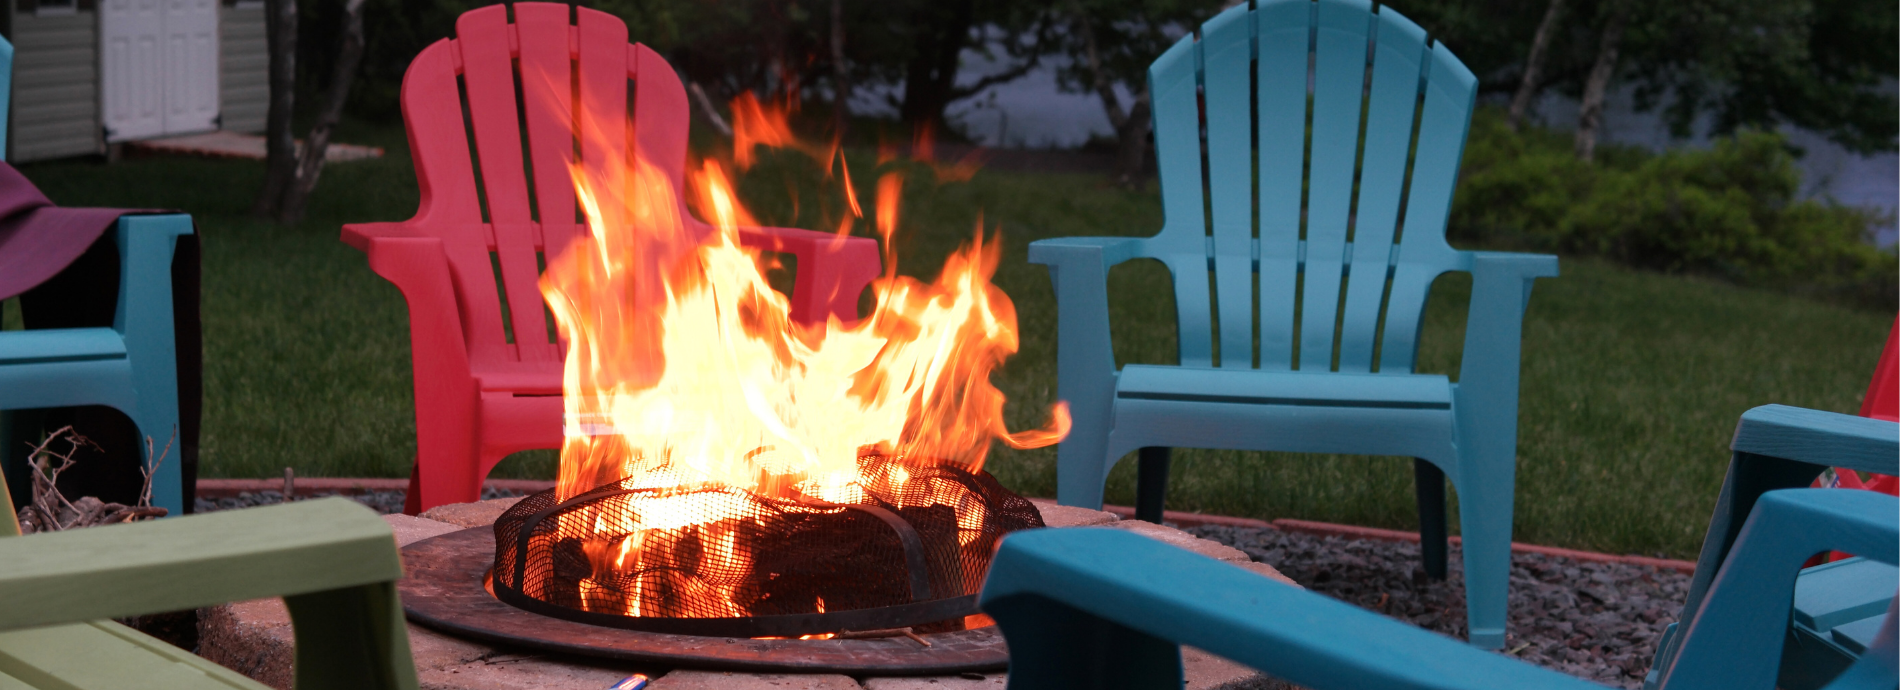 Image of a contained campfire in a rear yard